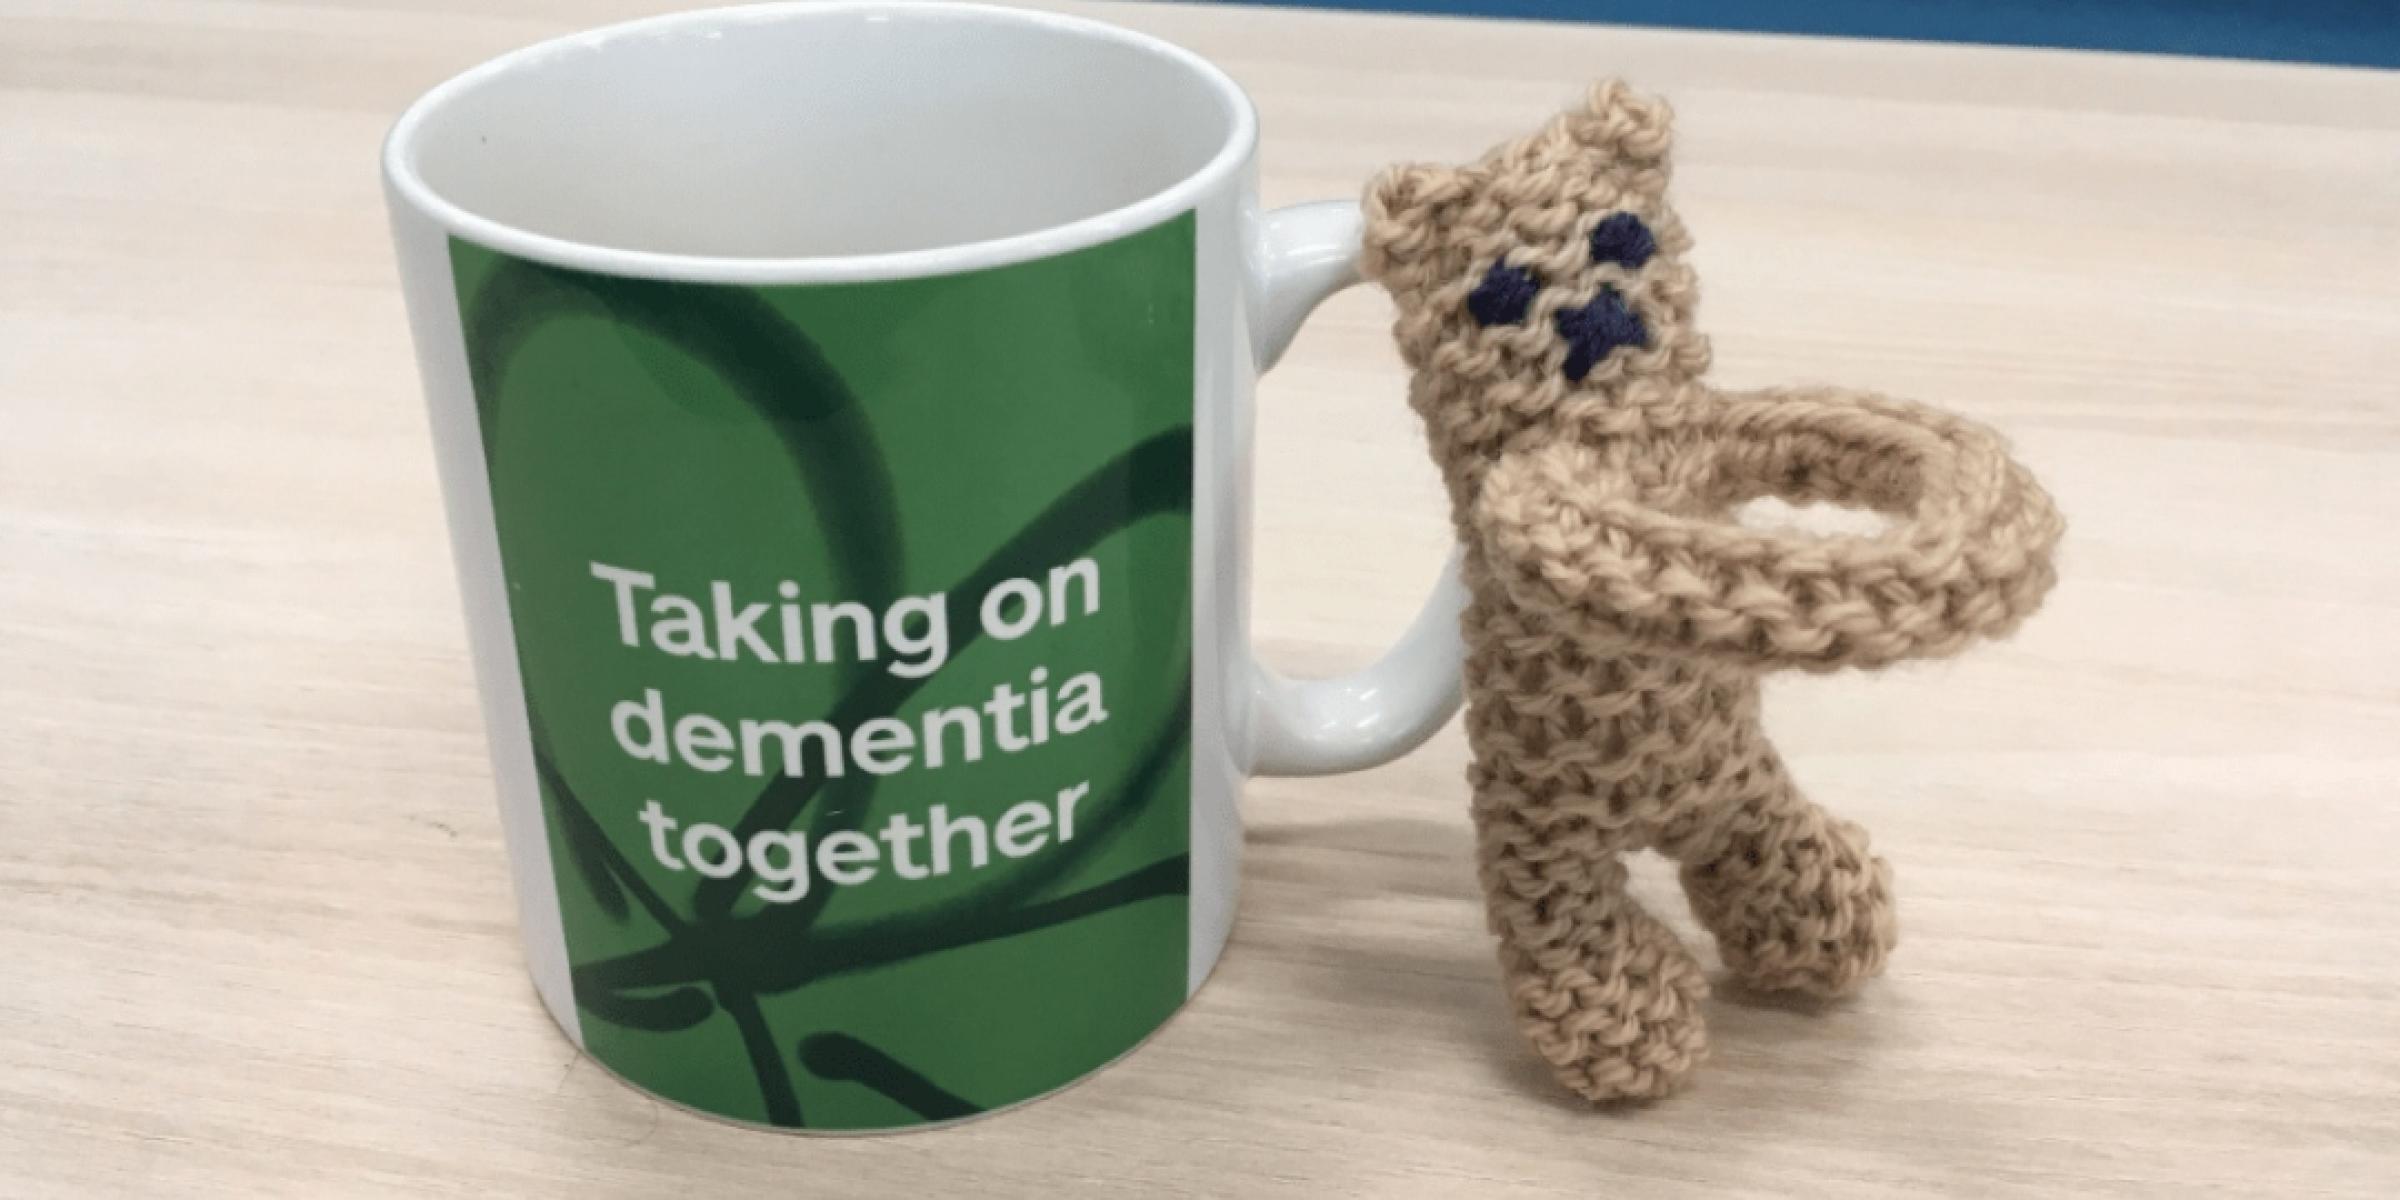 A fidget toy pictured next to an Alzheimer's Society branded mug